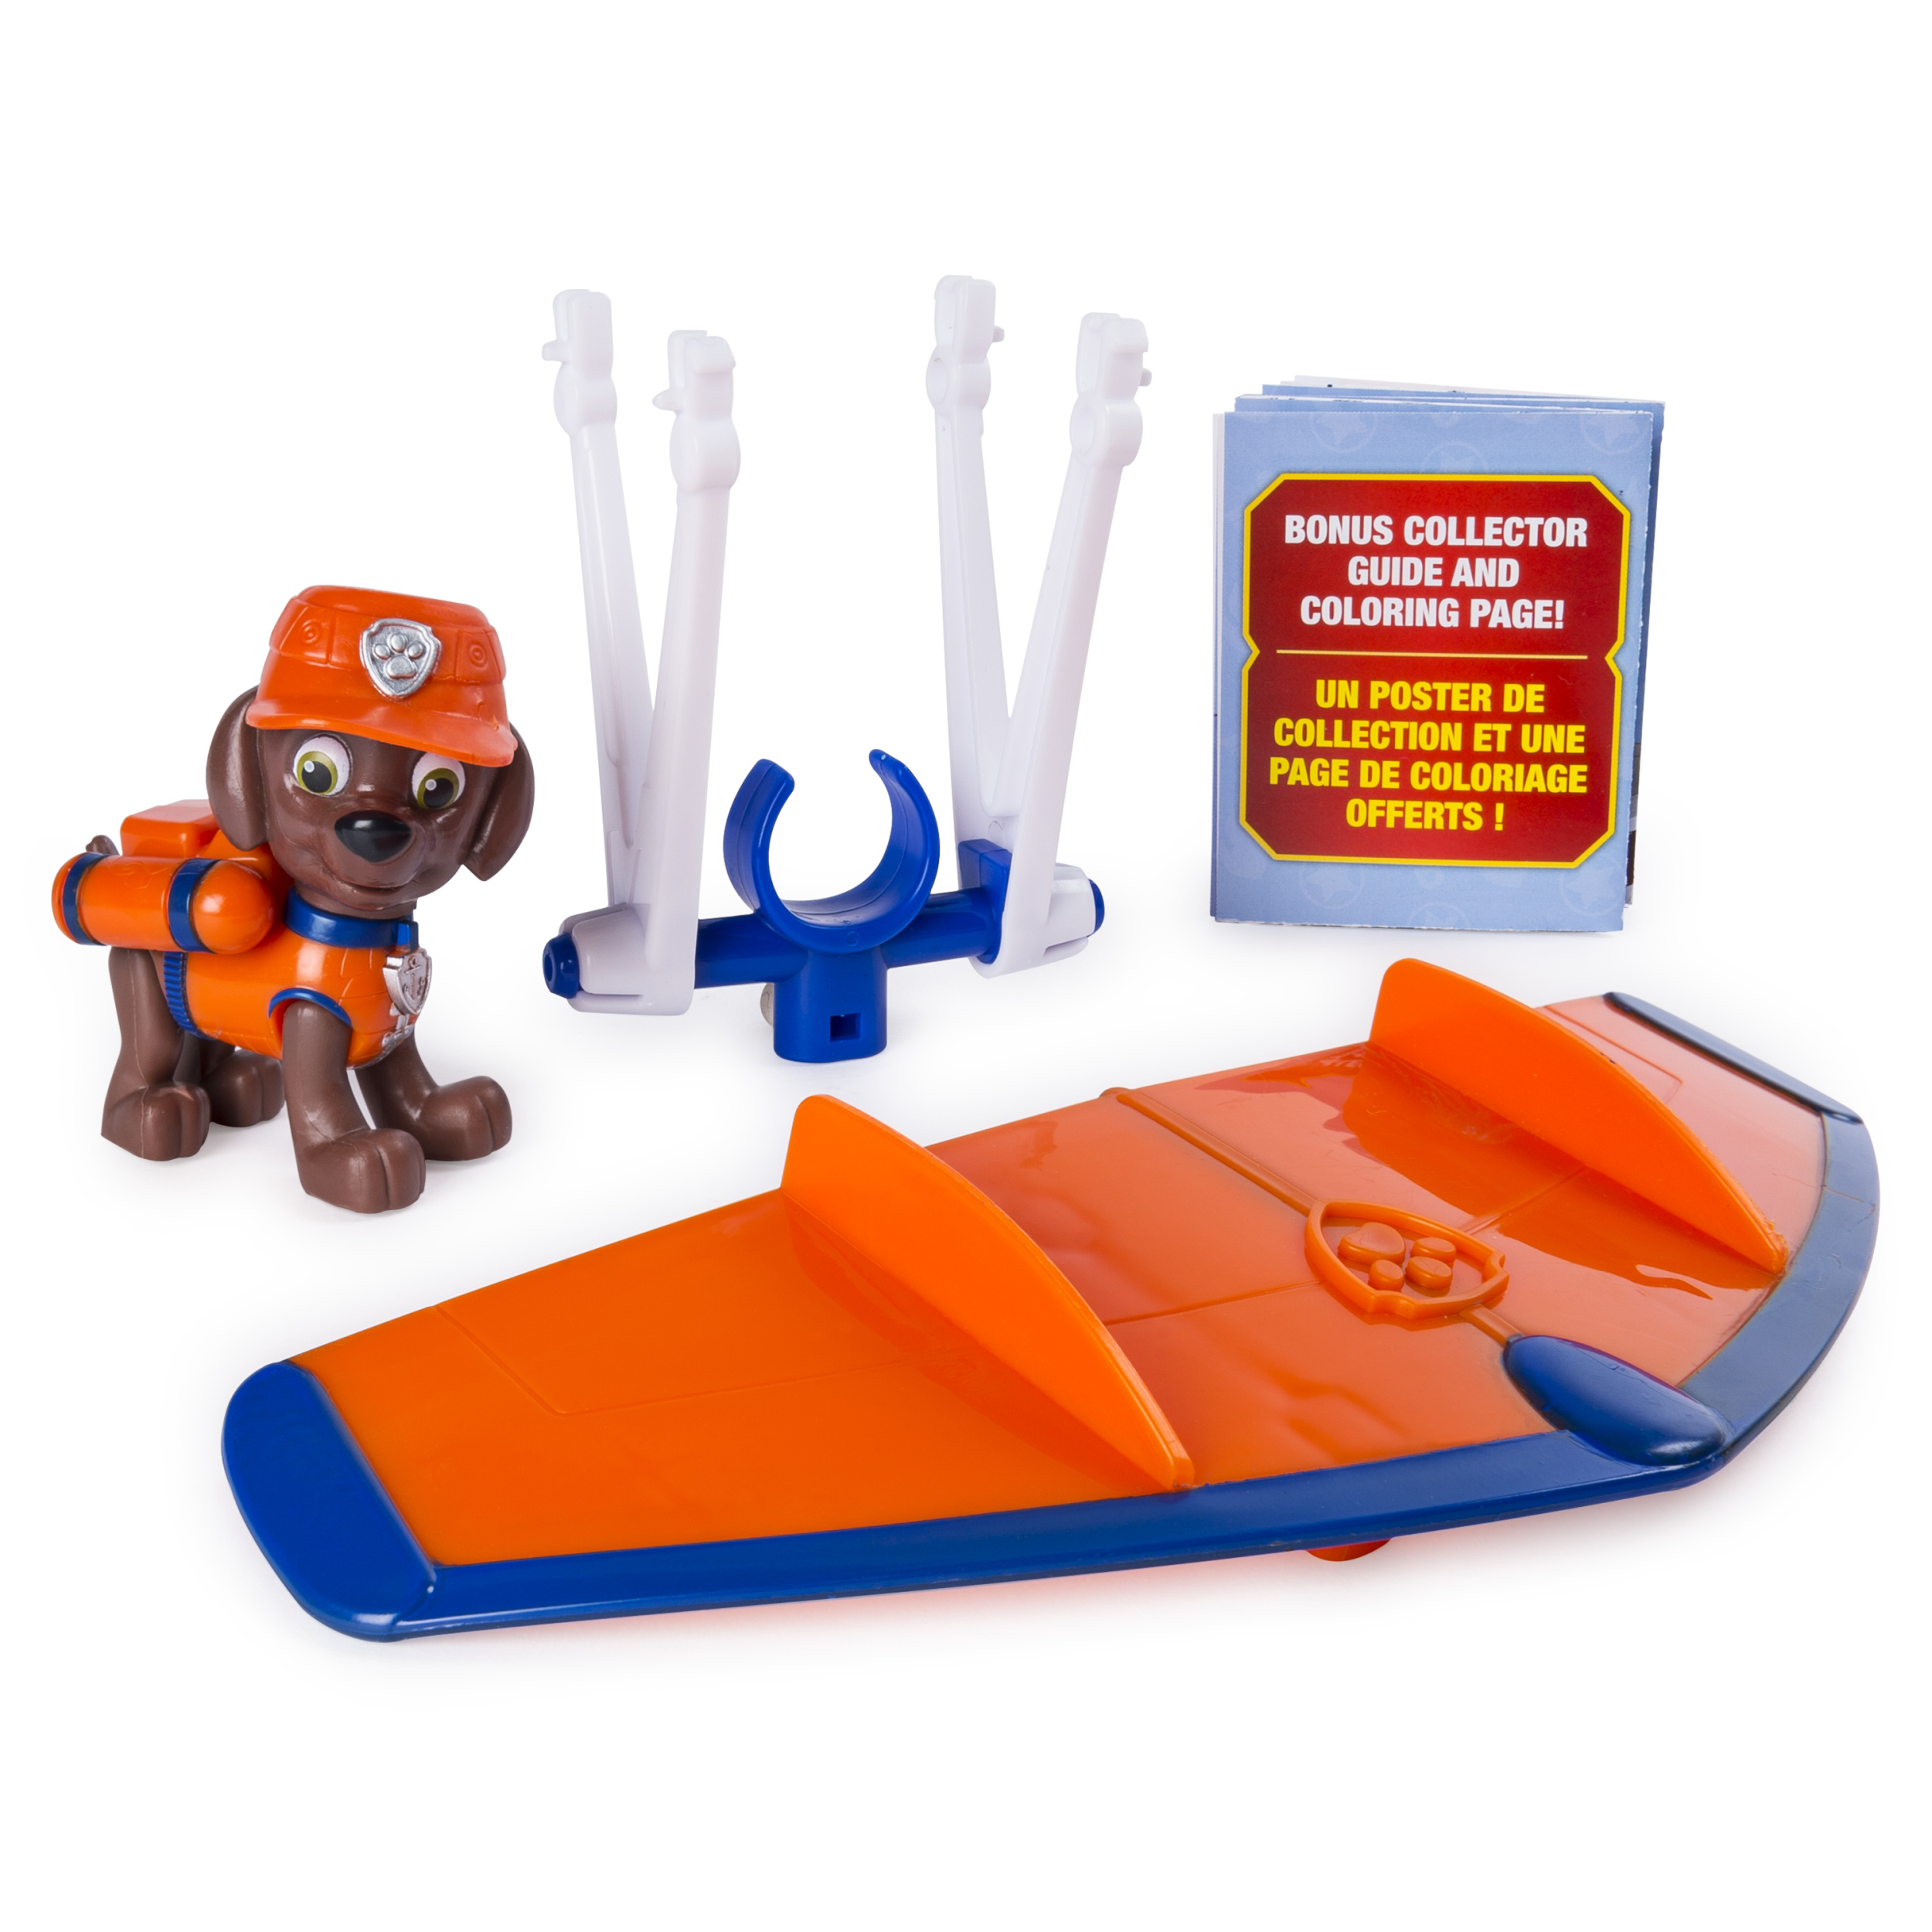 PAW Patrol Ultimate Rescue, Zuma’s Mini Hang Glider with Collectible Figure for Ages 3 and Up - image 1 of 6